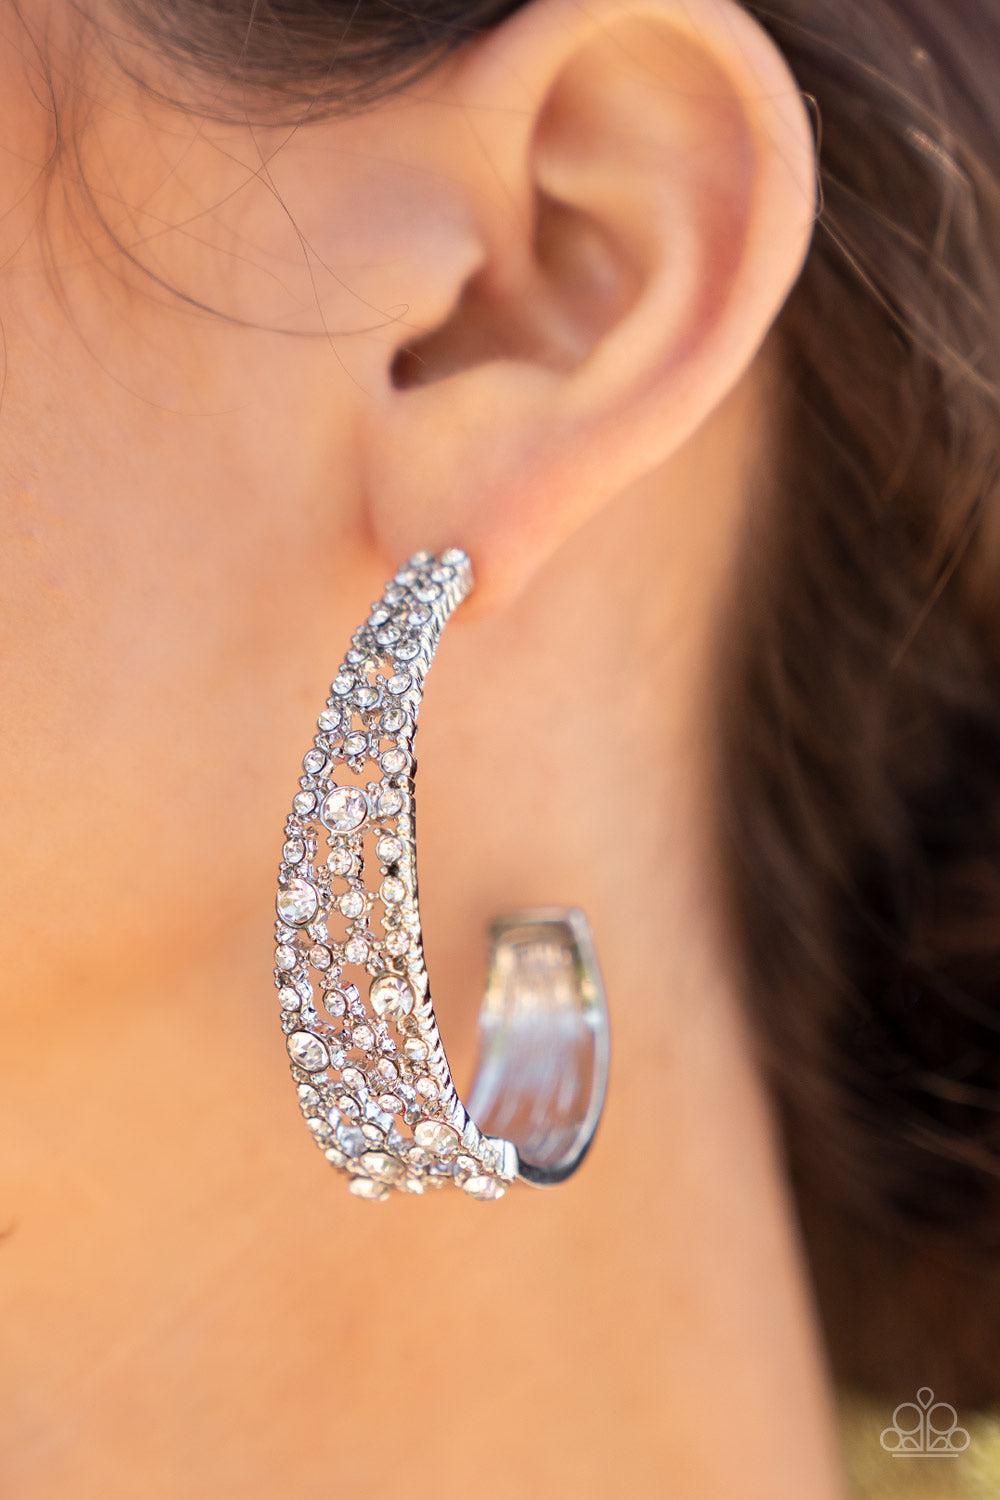 Cold As Ice White Rhinestone Hoop Earrings - Paparazzi Accessories-on model - CarasShop.com - $5 Jewelry by Cara Jewels